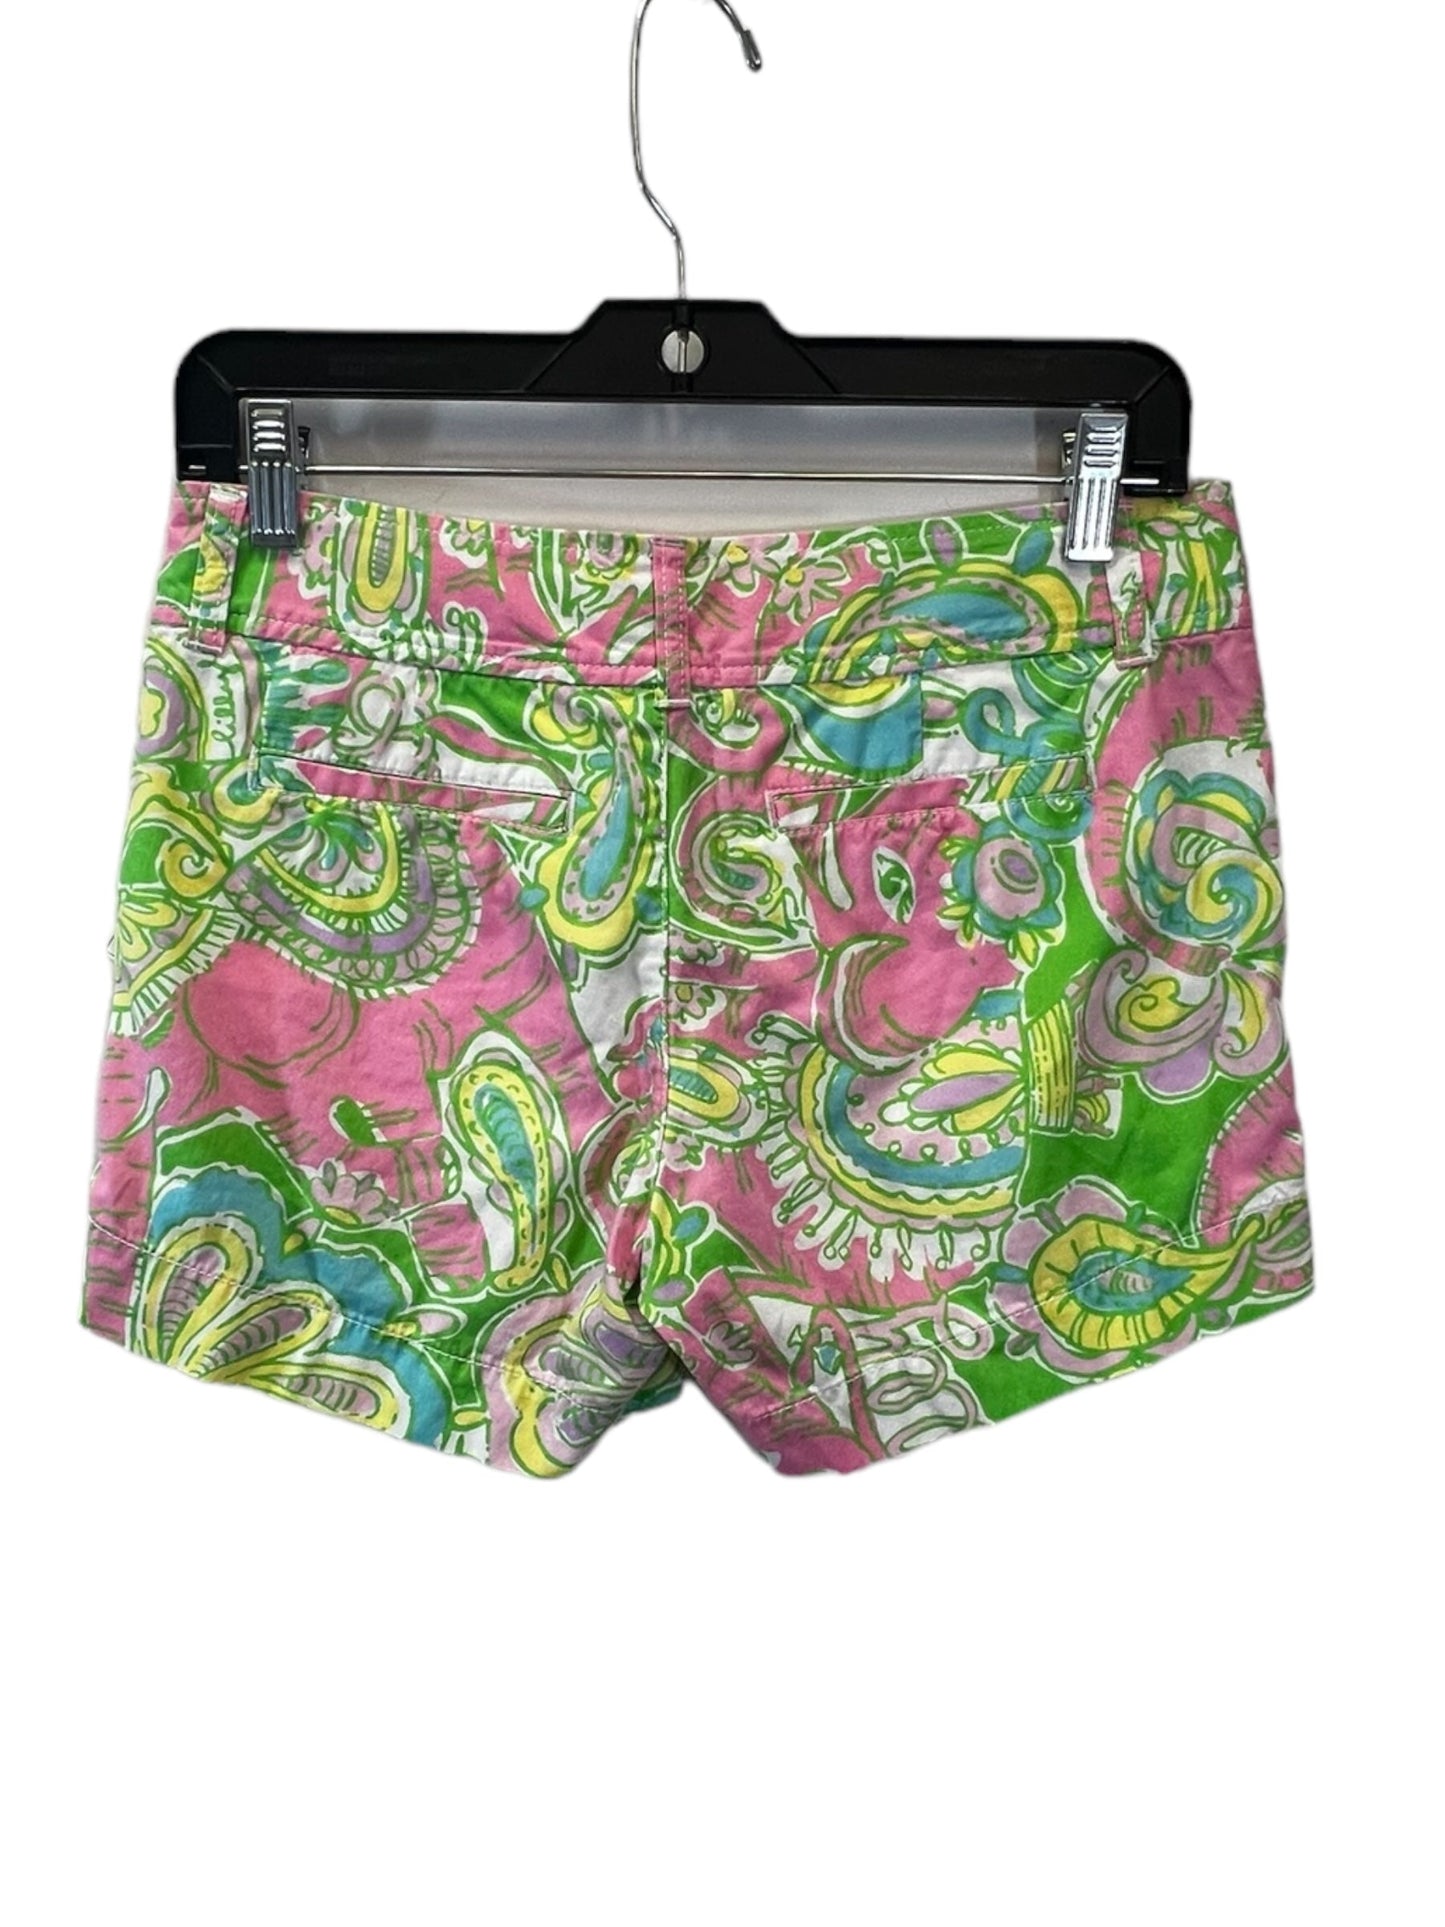 Green & Pink Shorts Lilly Pulitzer, Size 0